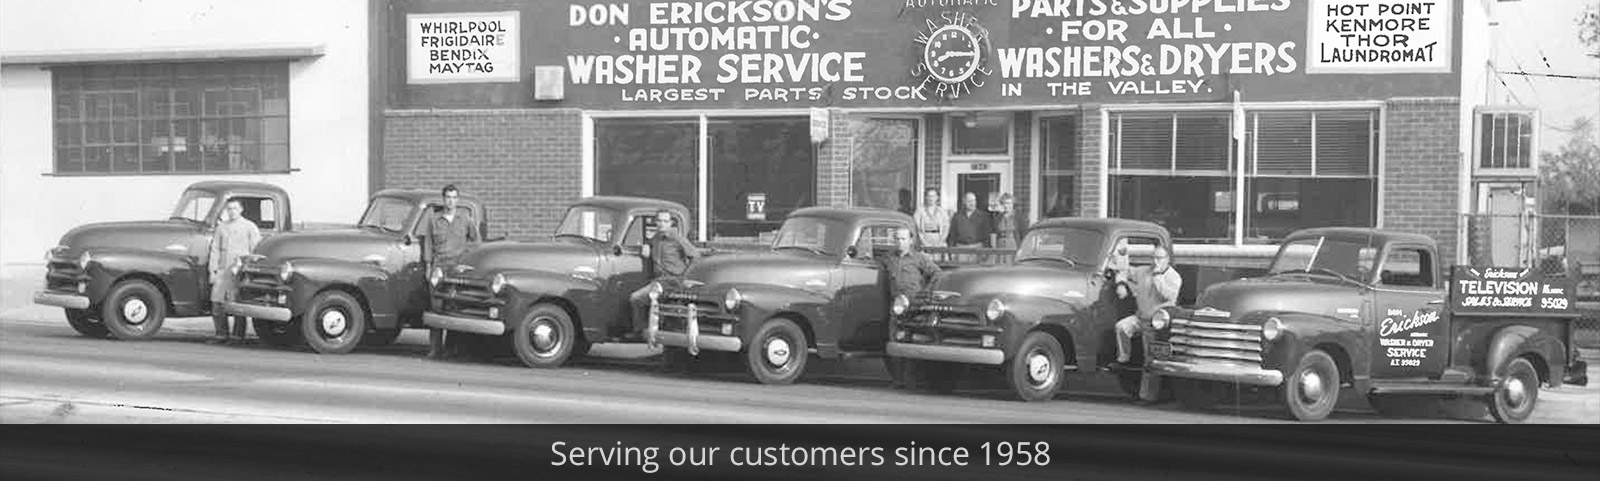 Serving our customers since 1958